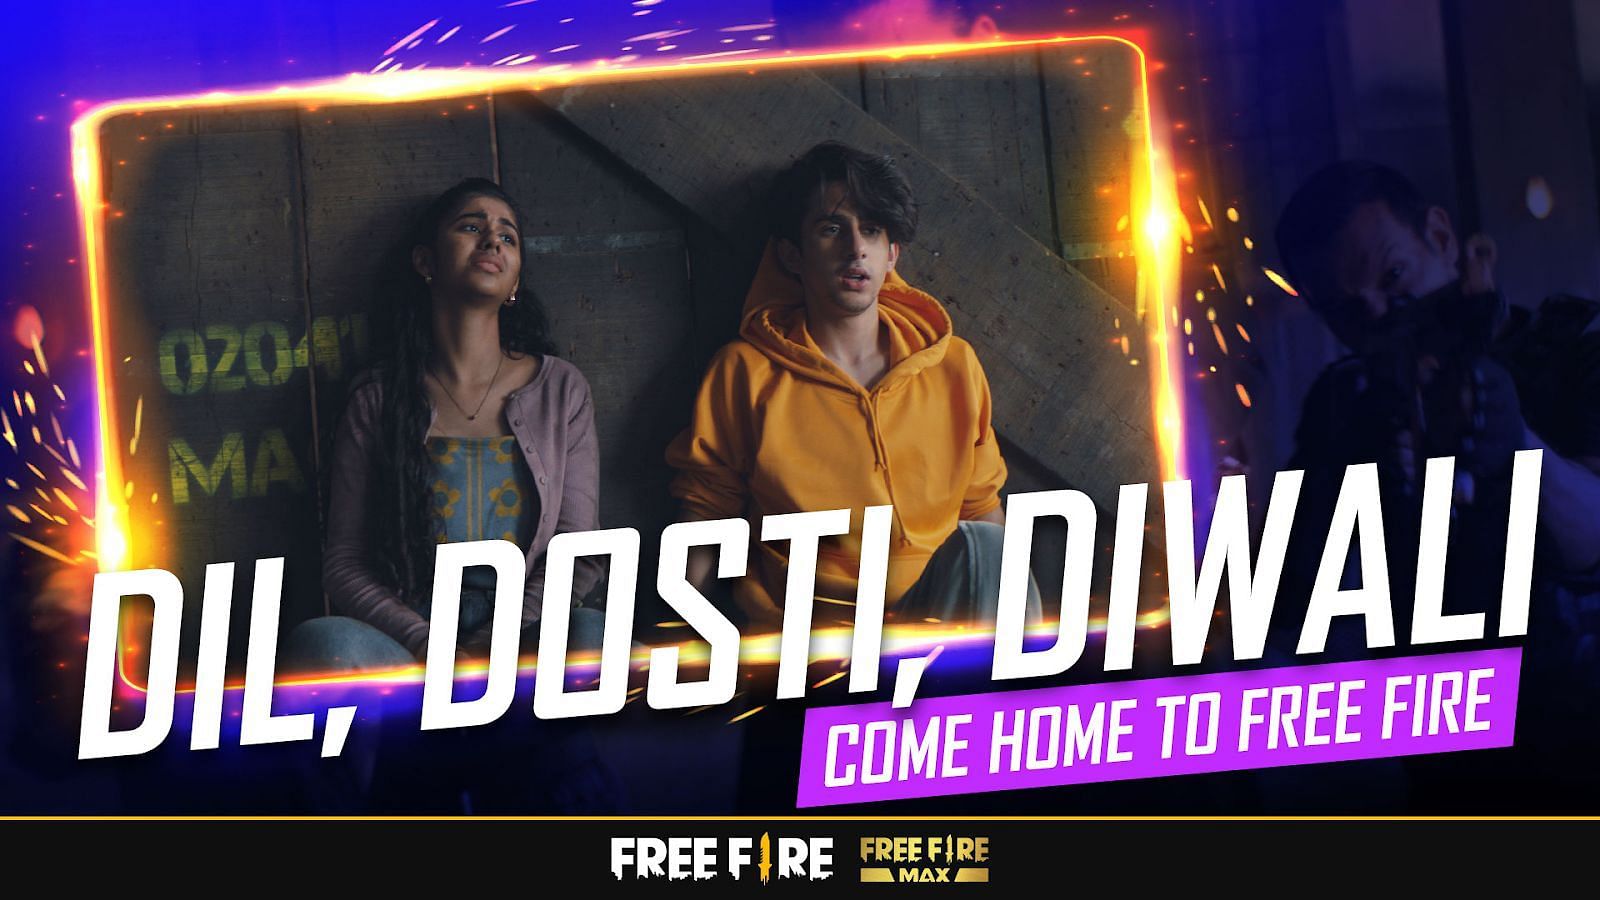 Dil, Dosti, Diwali - Come Home To Free Fire